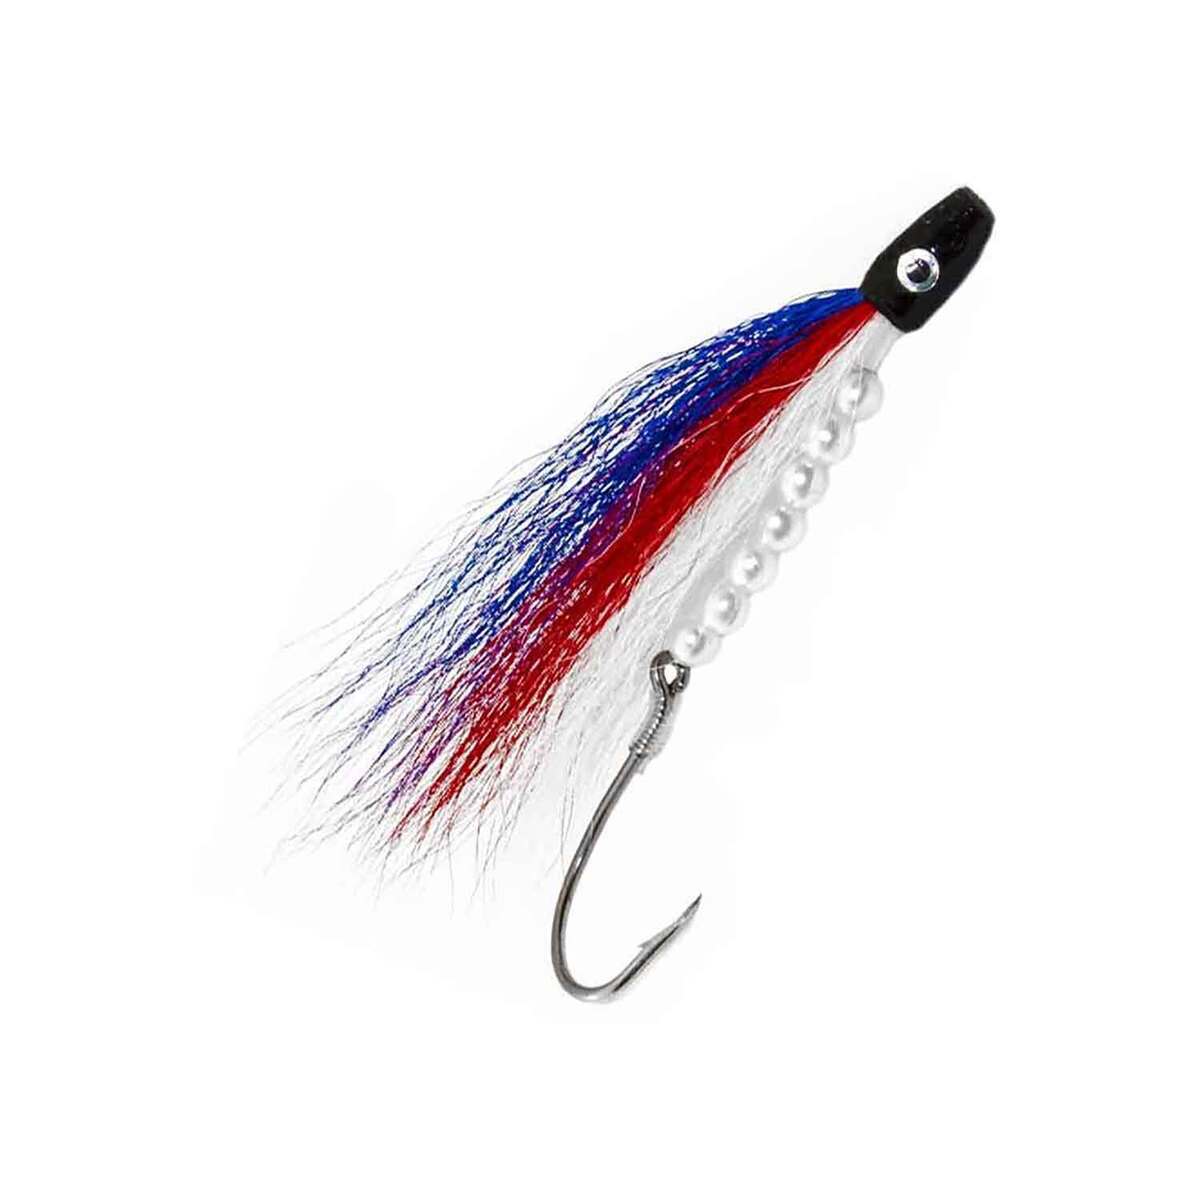 FLADEN - MAXXIMUS FLY FISHING BRAIDED LEADER LOOPS 3PCE — Last Cast Bait  and Tackle